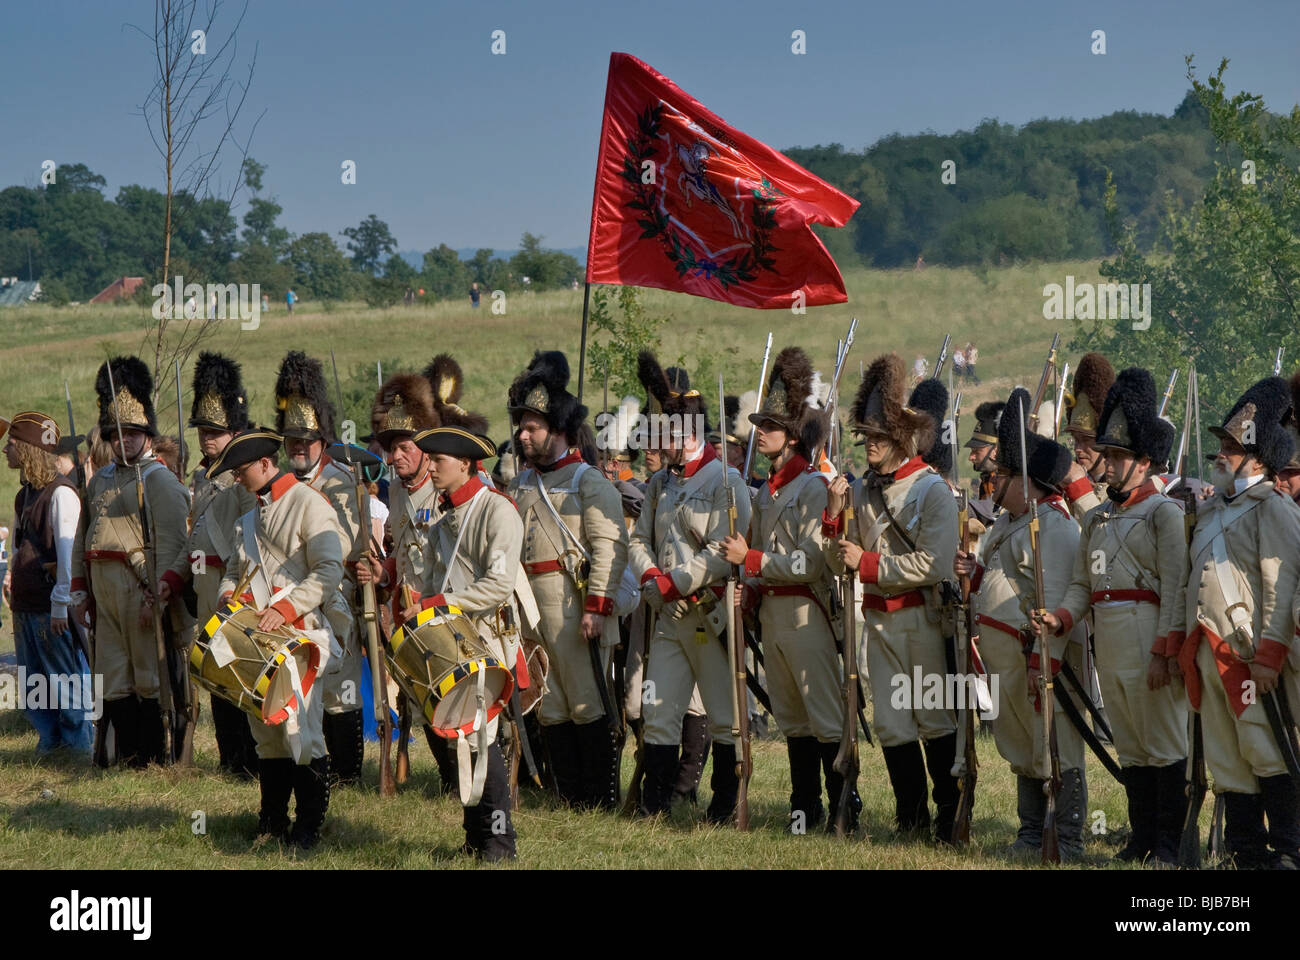 Reenactment of the Siege of Neisse during Napoleonic War with Prussia in 1807 at Nysa, Opolskie, Poland Stock Photo